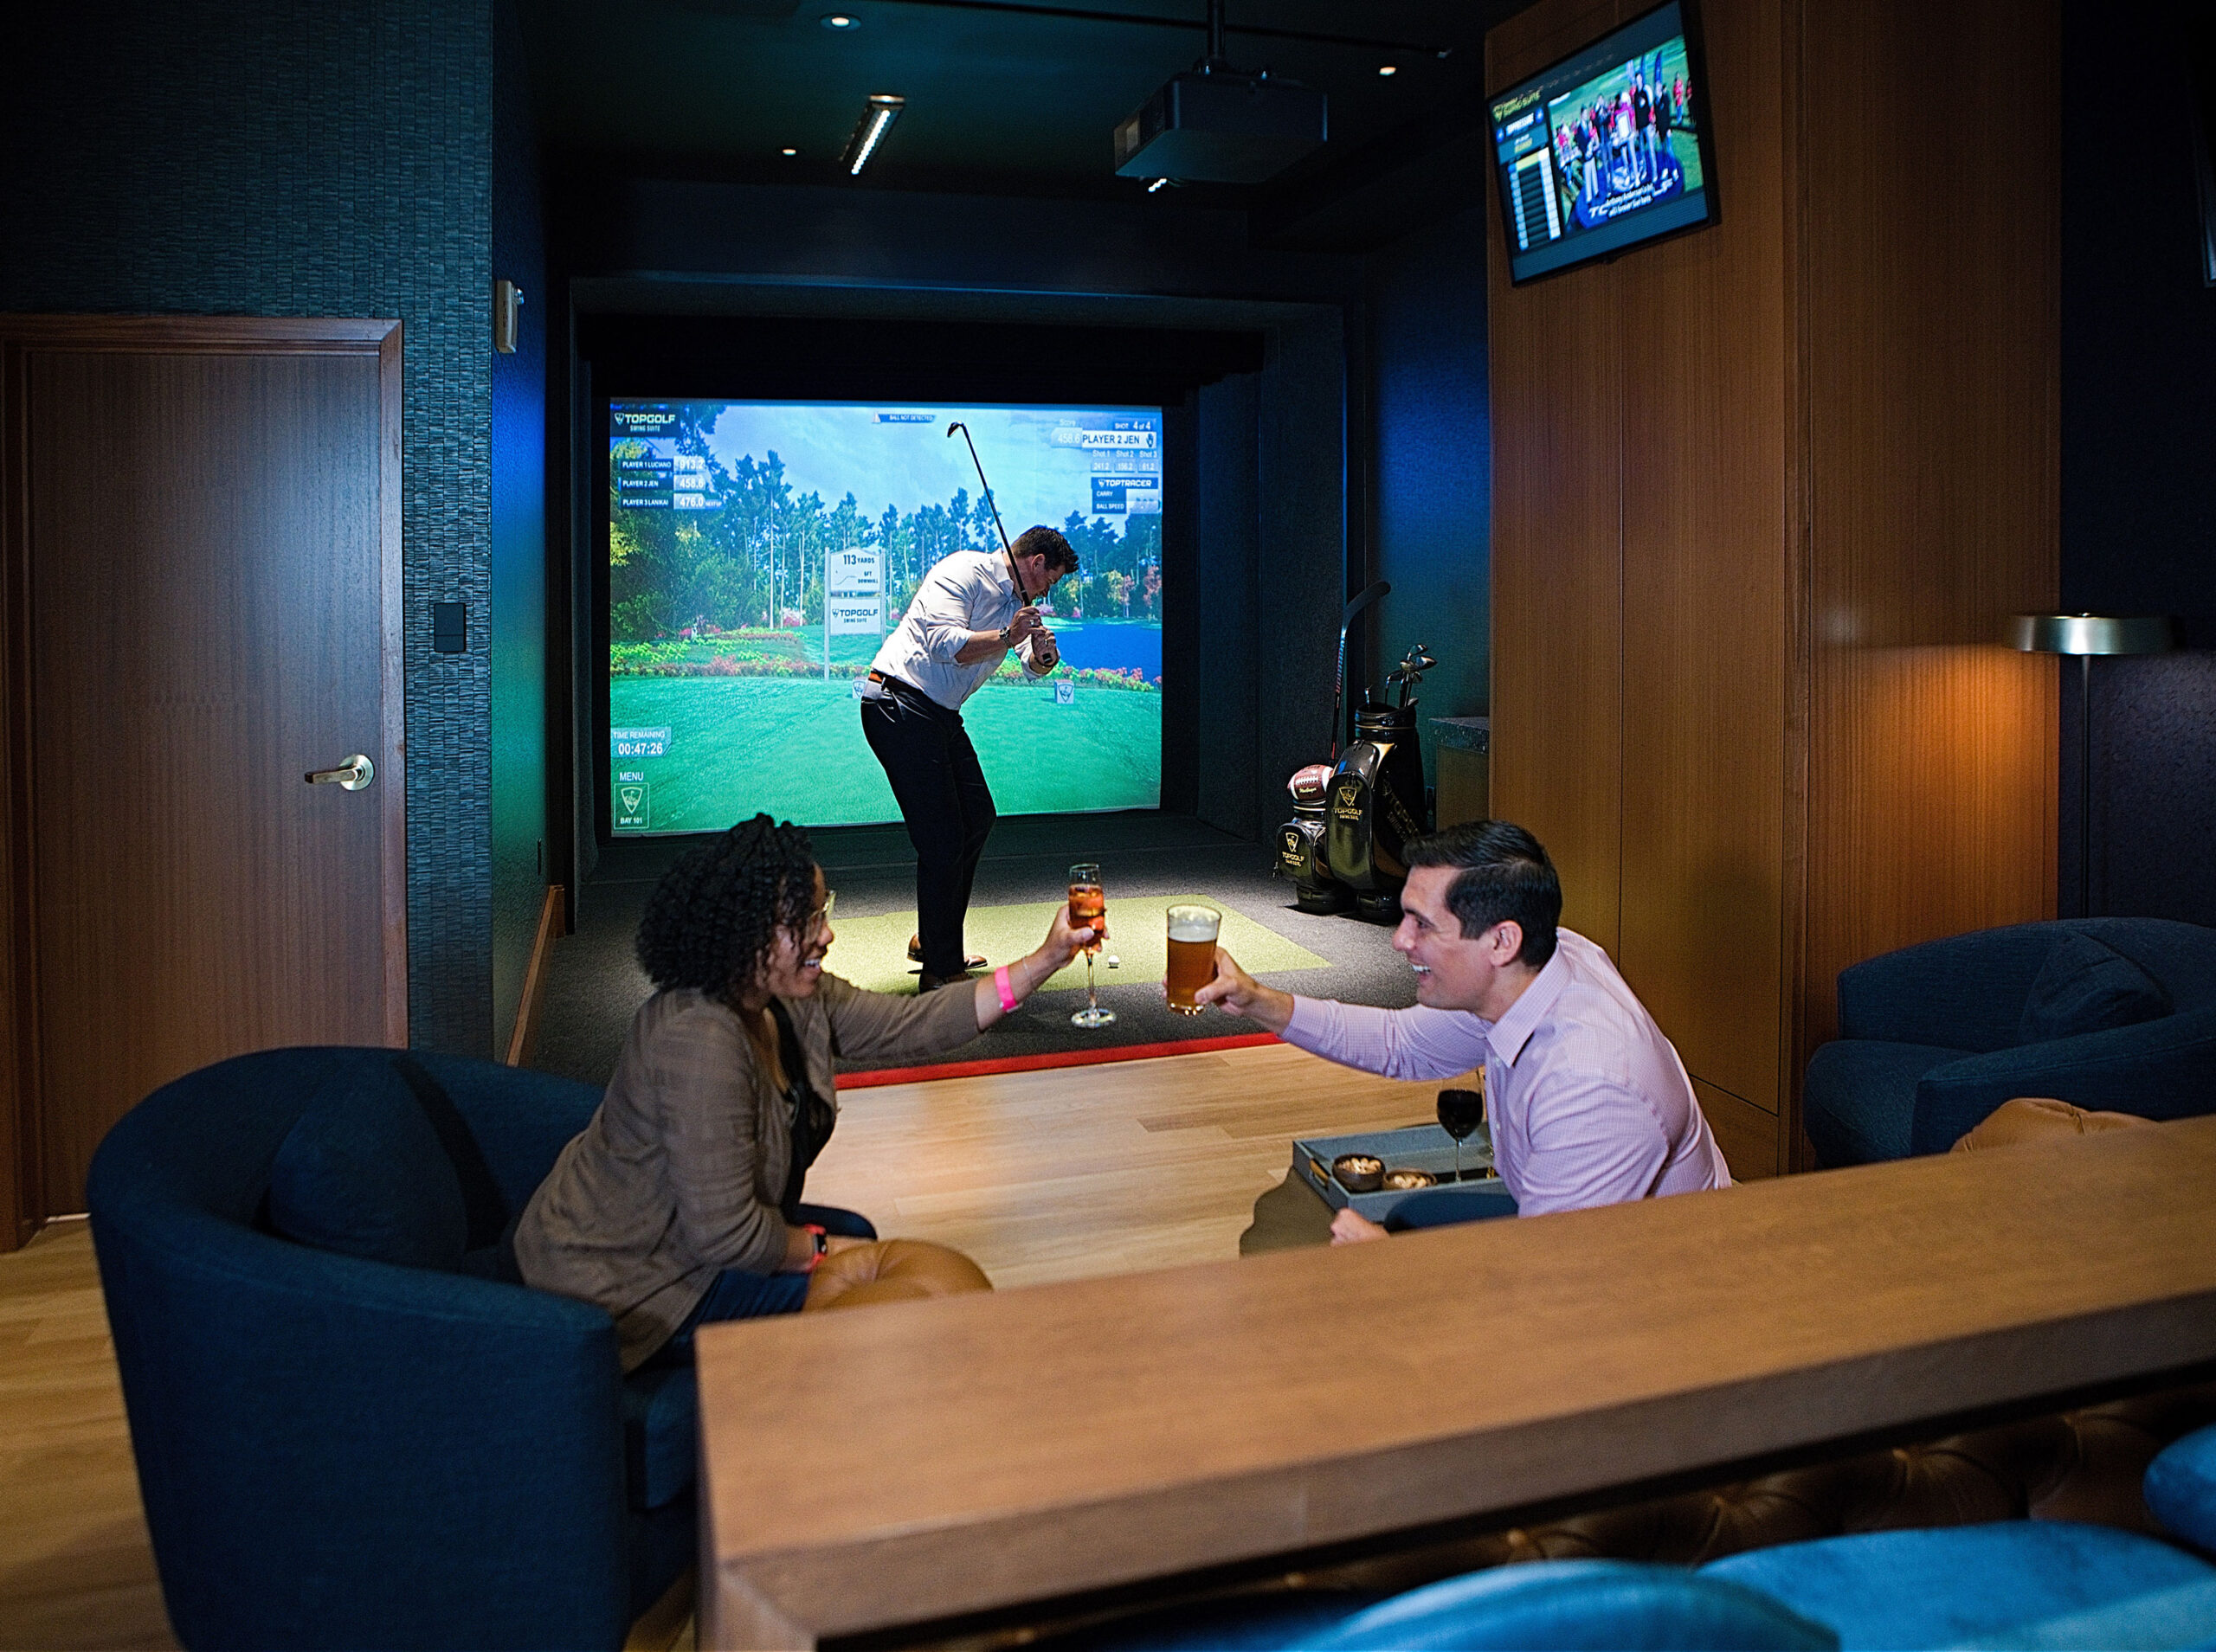 Top Golf suite with a man playing their golf VR game